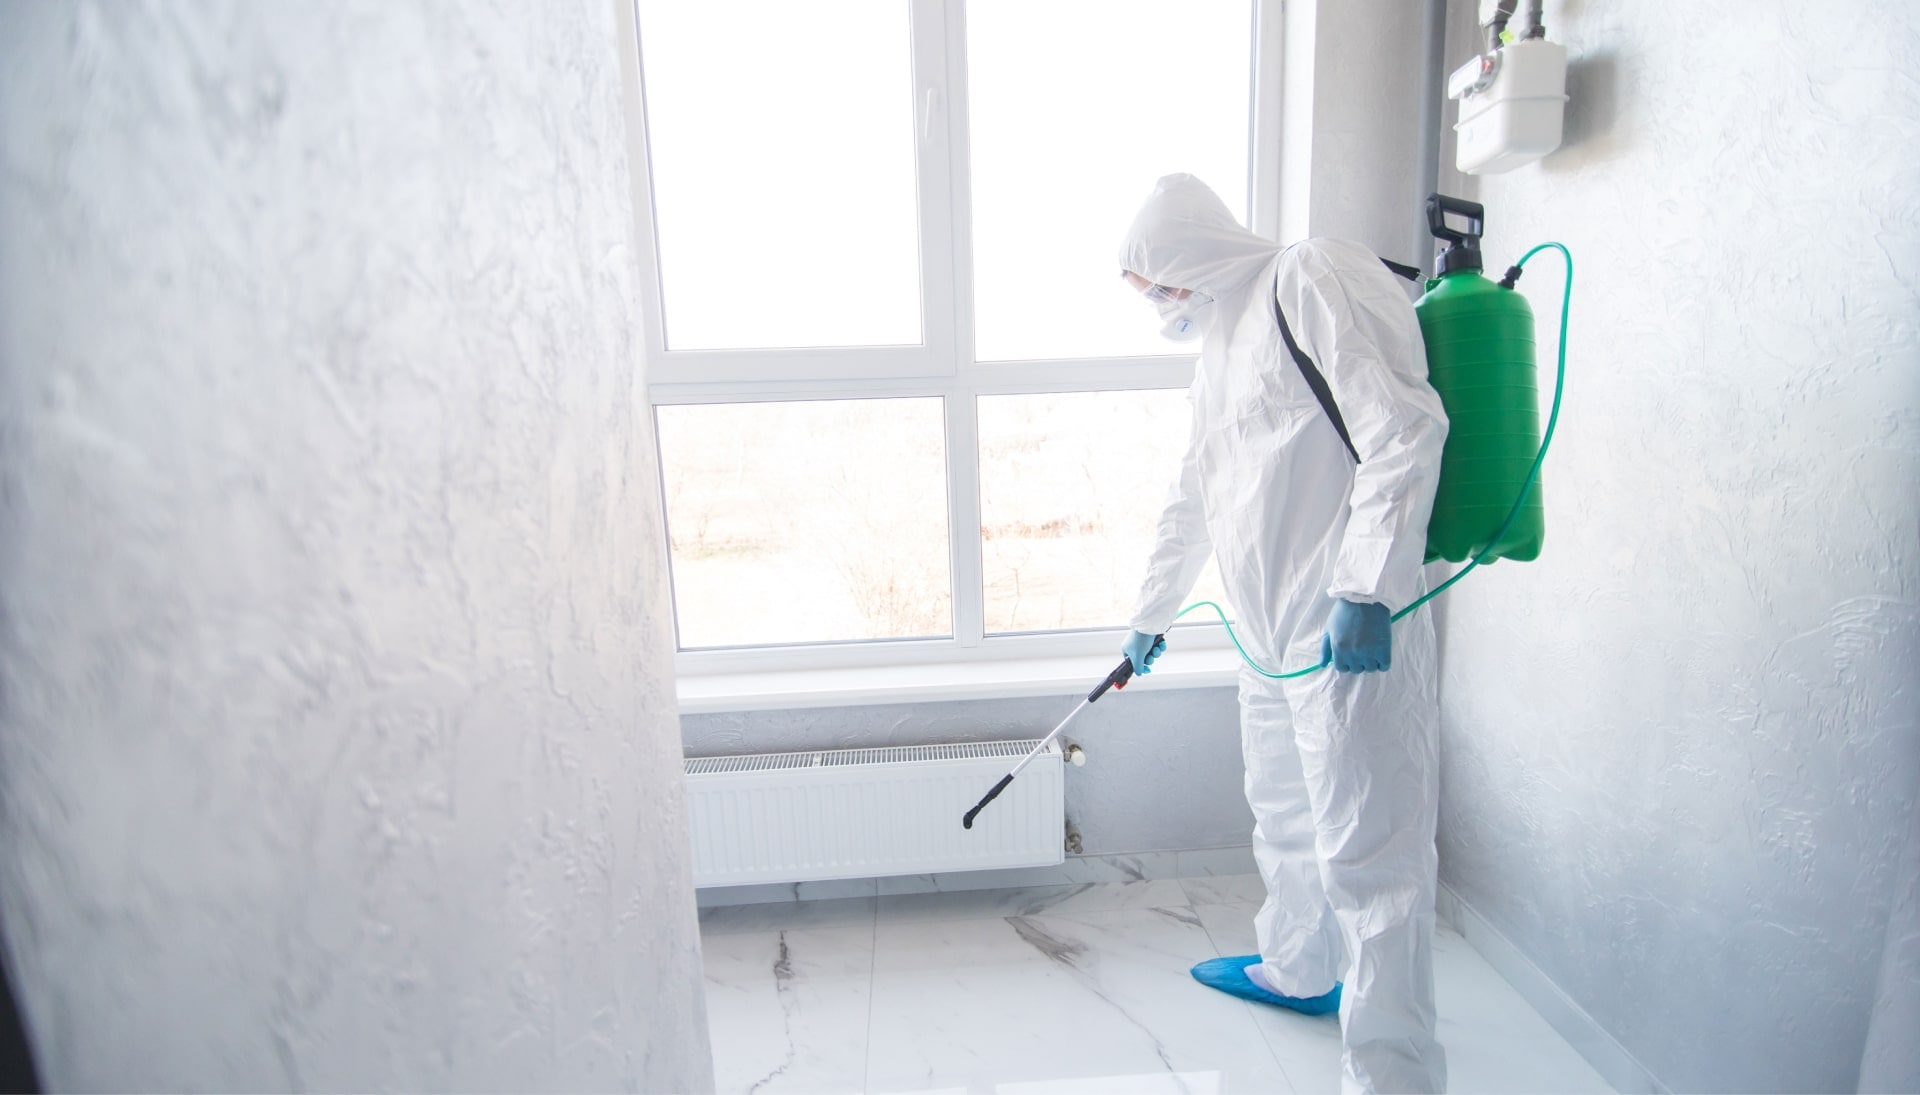 We provide the highest-quality mold inspection, testing, and removal services in the Chattanooga, Tennessee area.